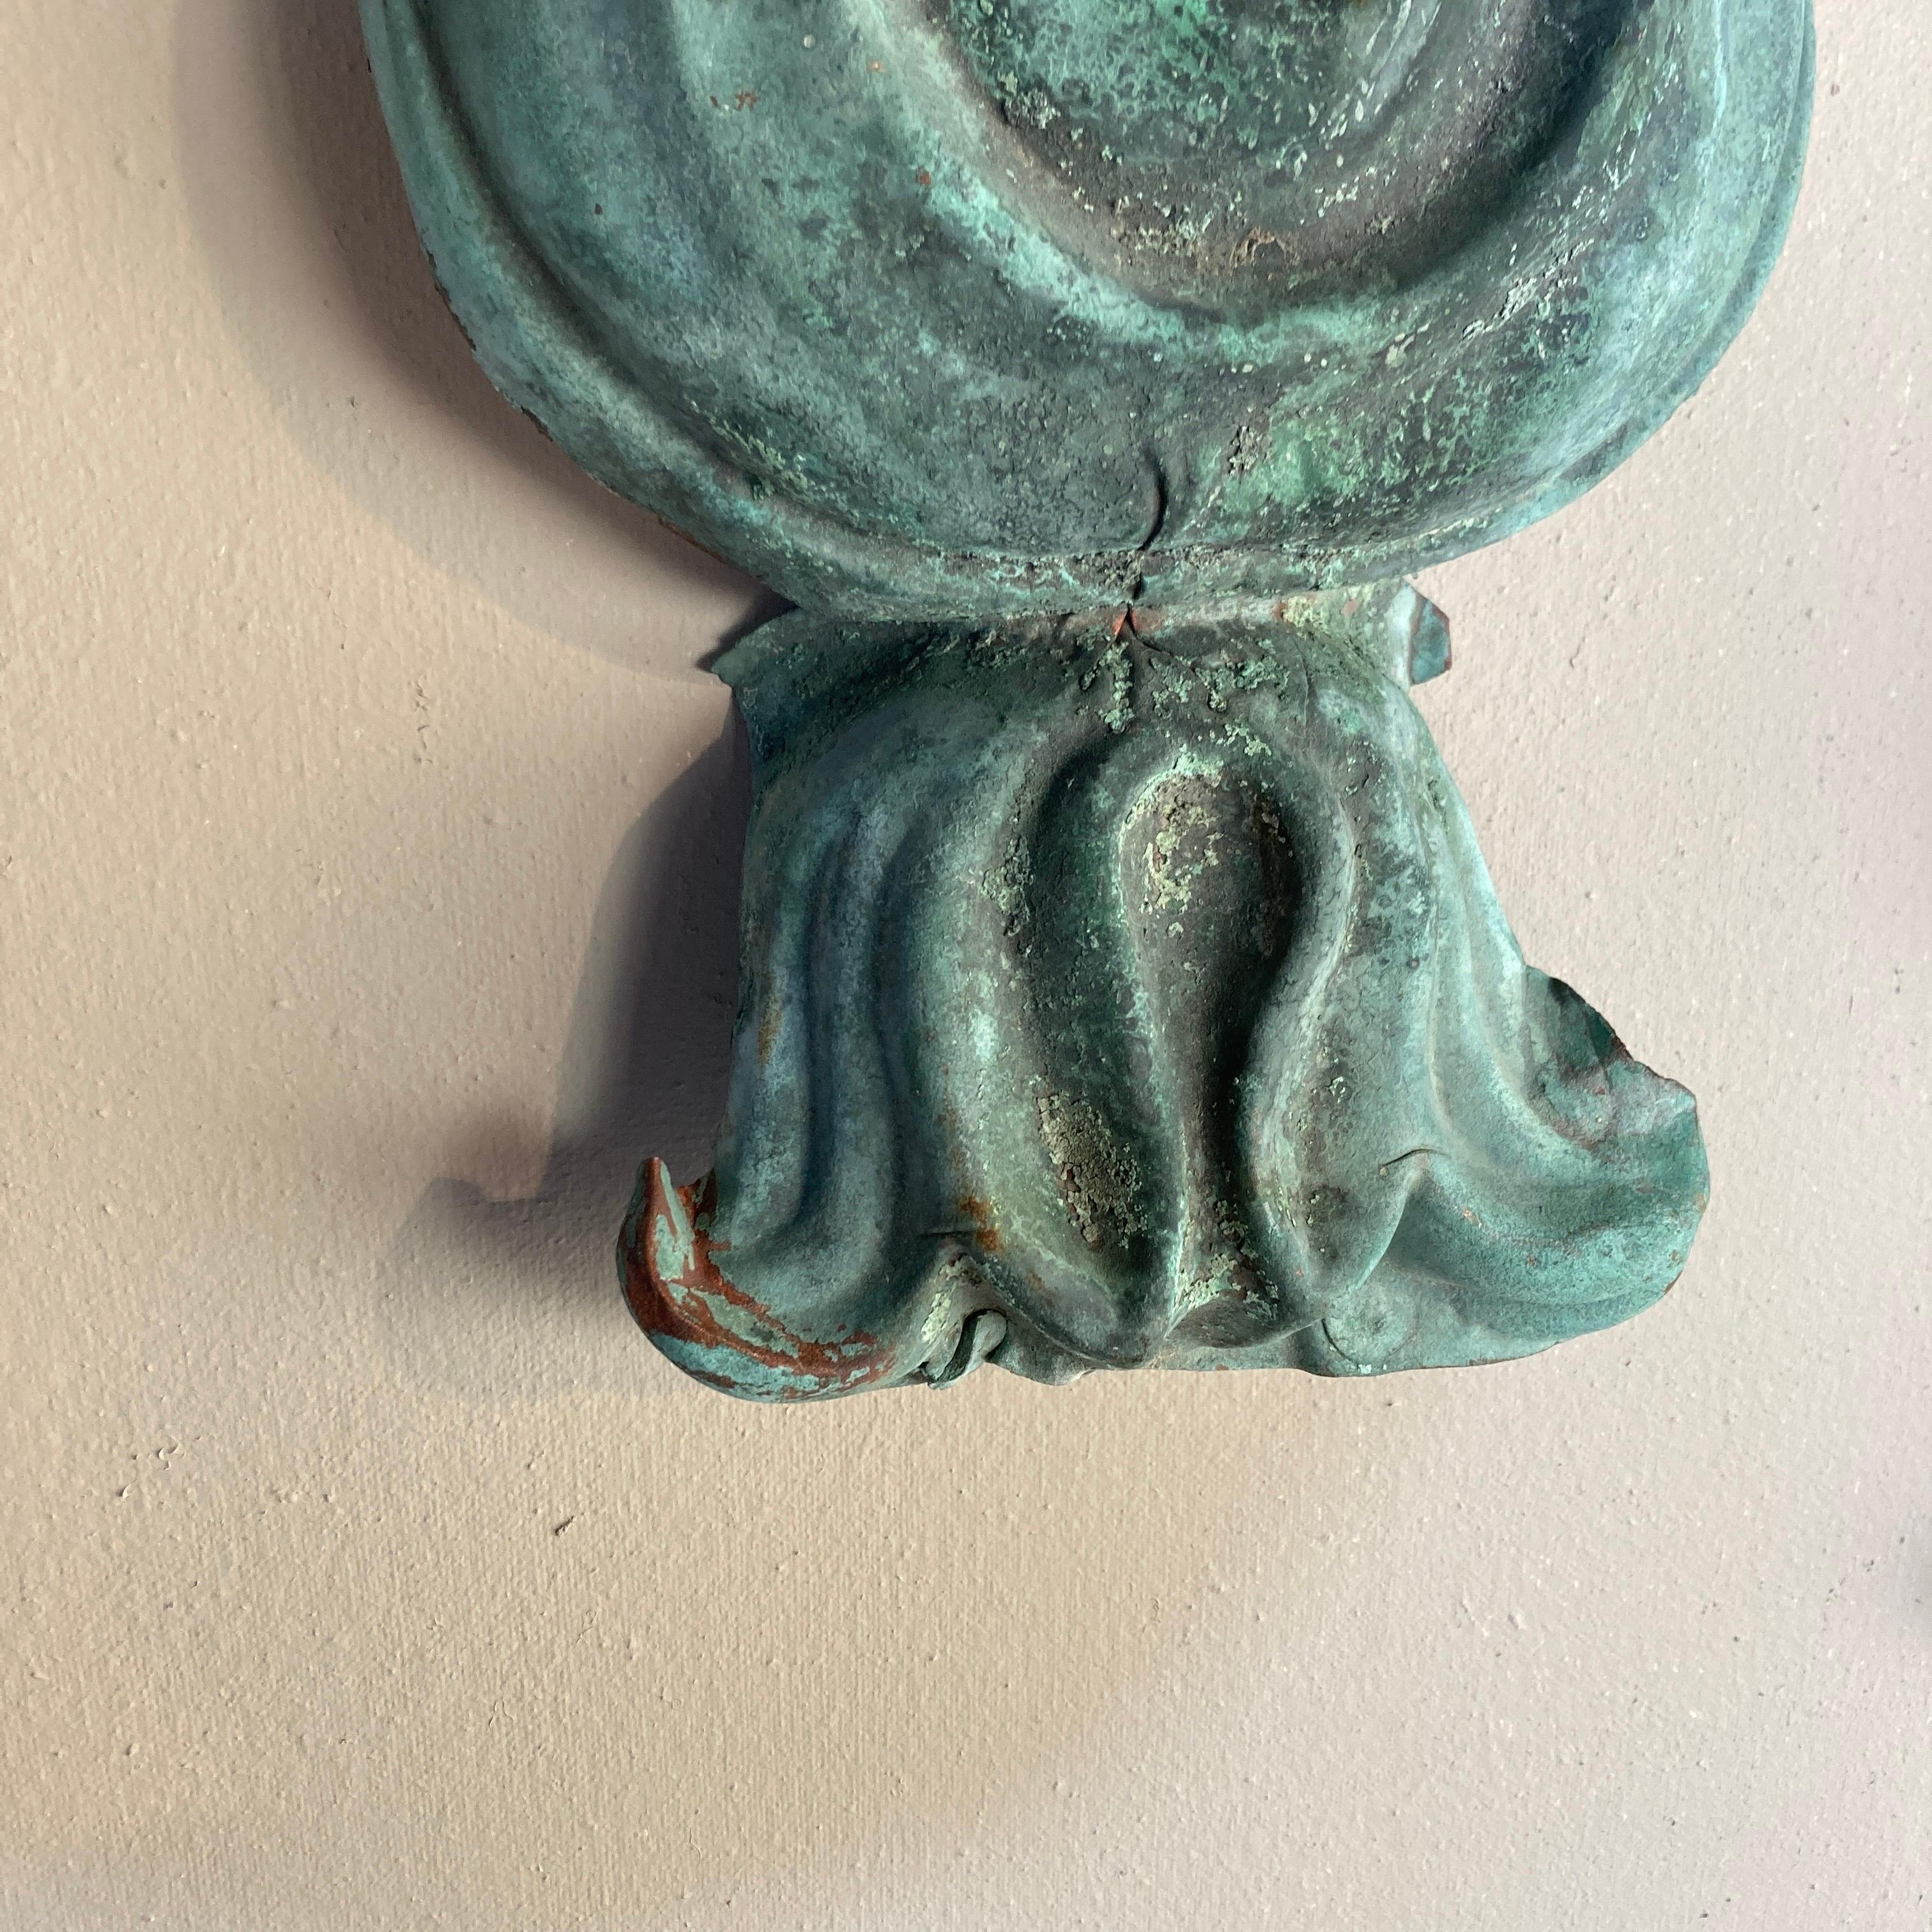 19th Century American Molded Verdigris Copper Urn Architectural Ornaments Pair For Sale 2